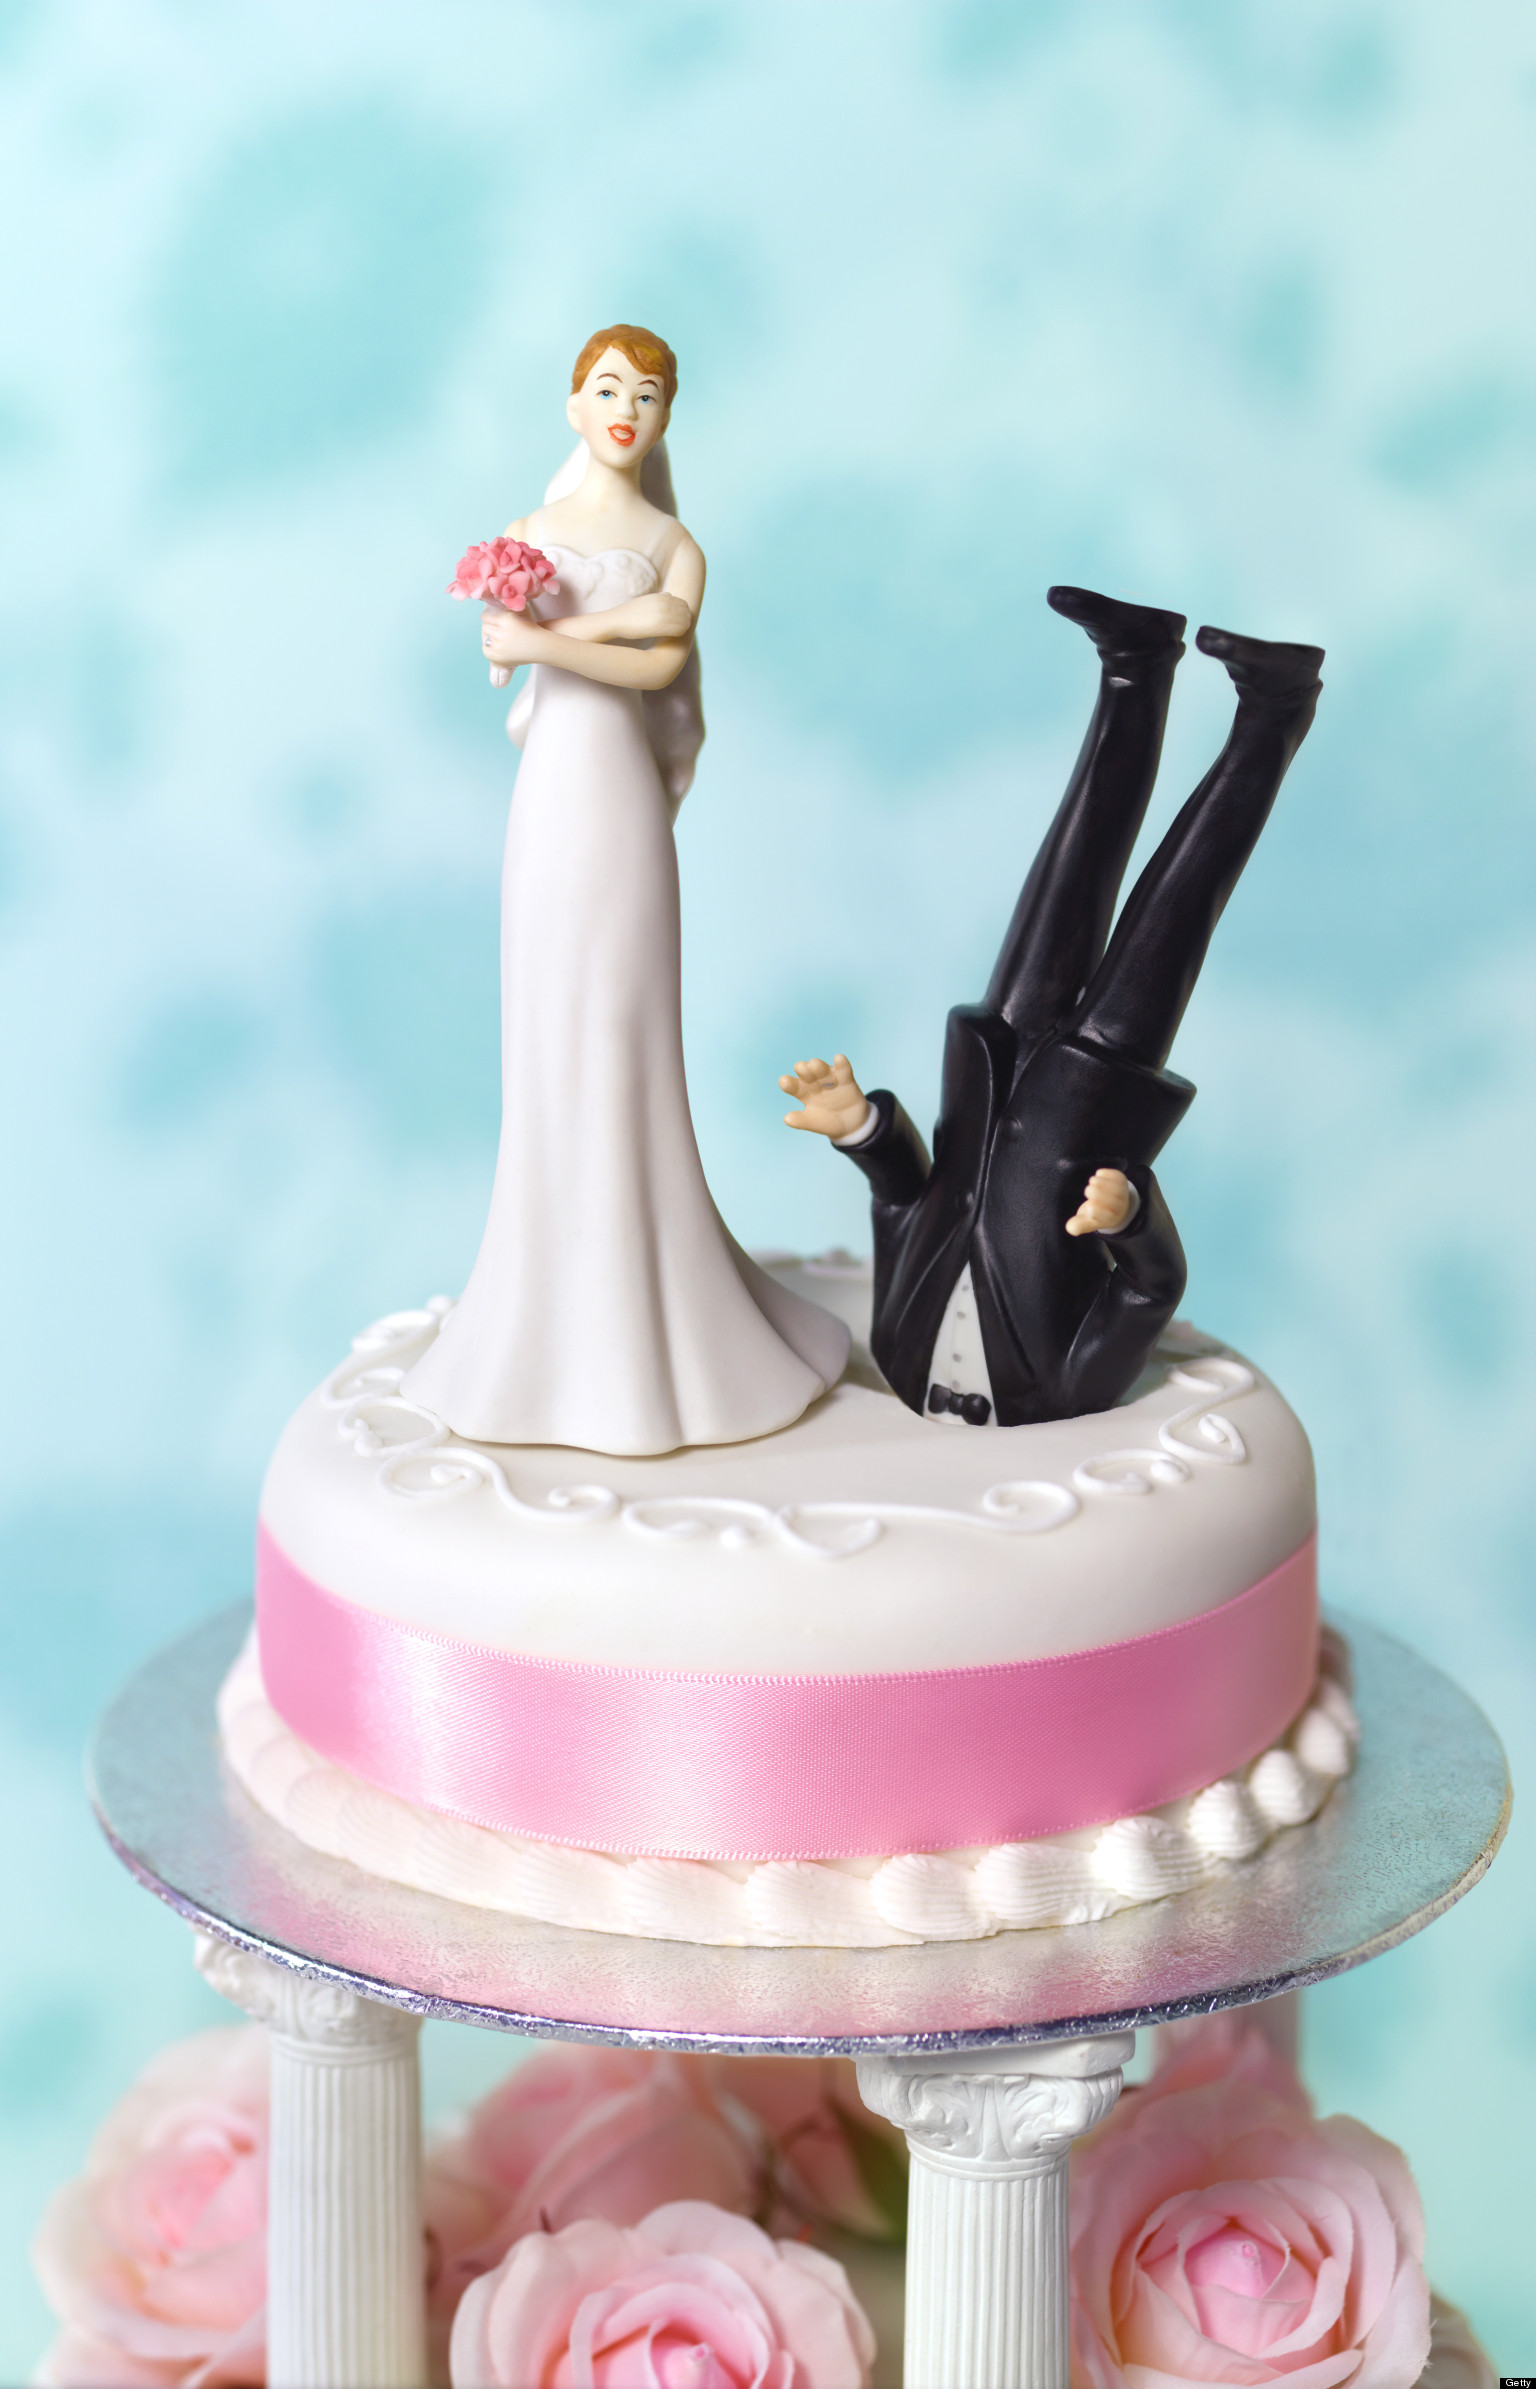 Funny wedding cakes pictures